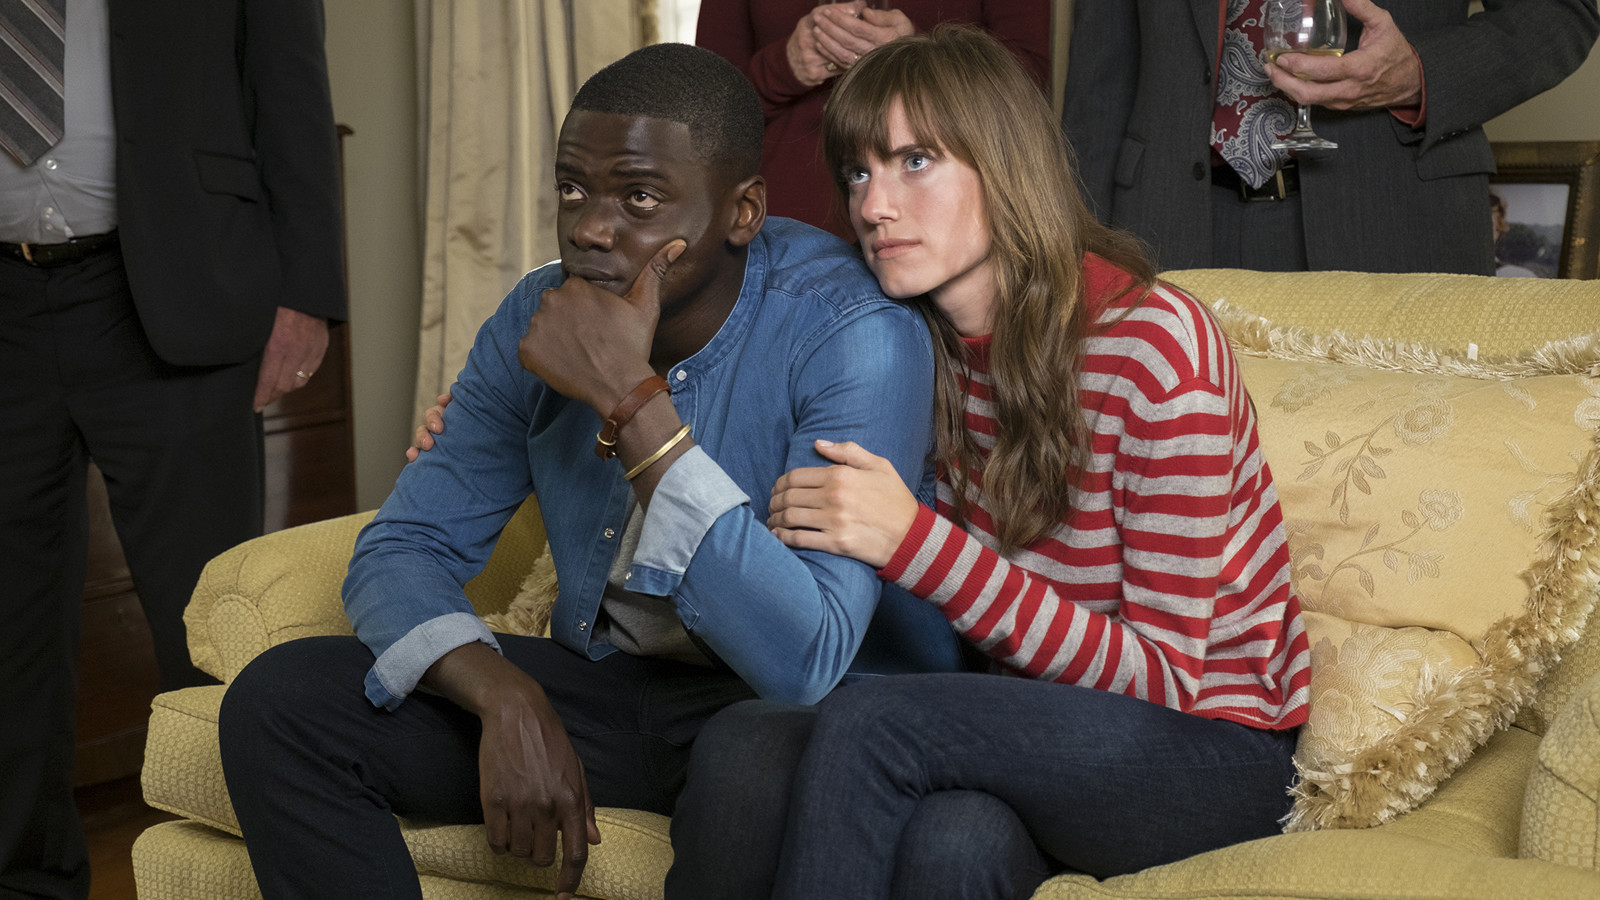 Jordan Peele S Clever Horror Satire Get Out Is An Overdue Hollywood Response To Our Racial